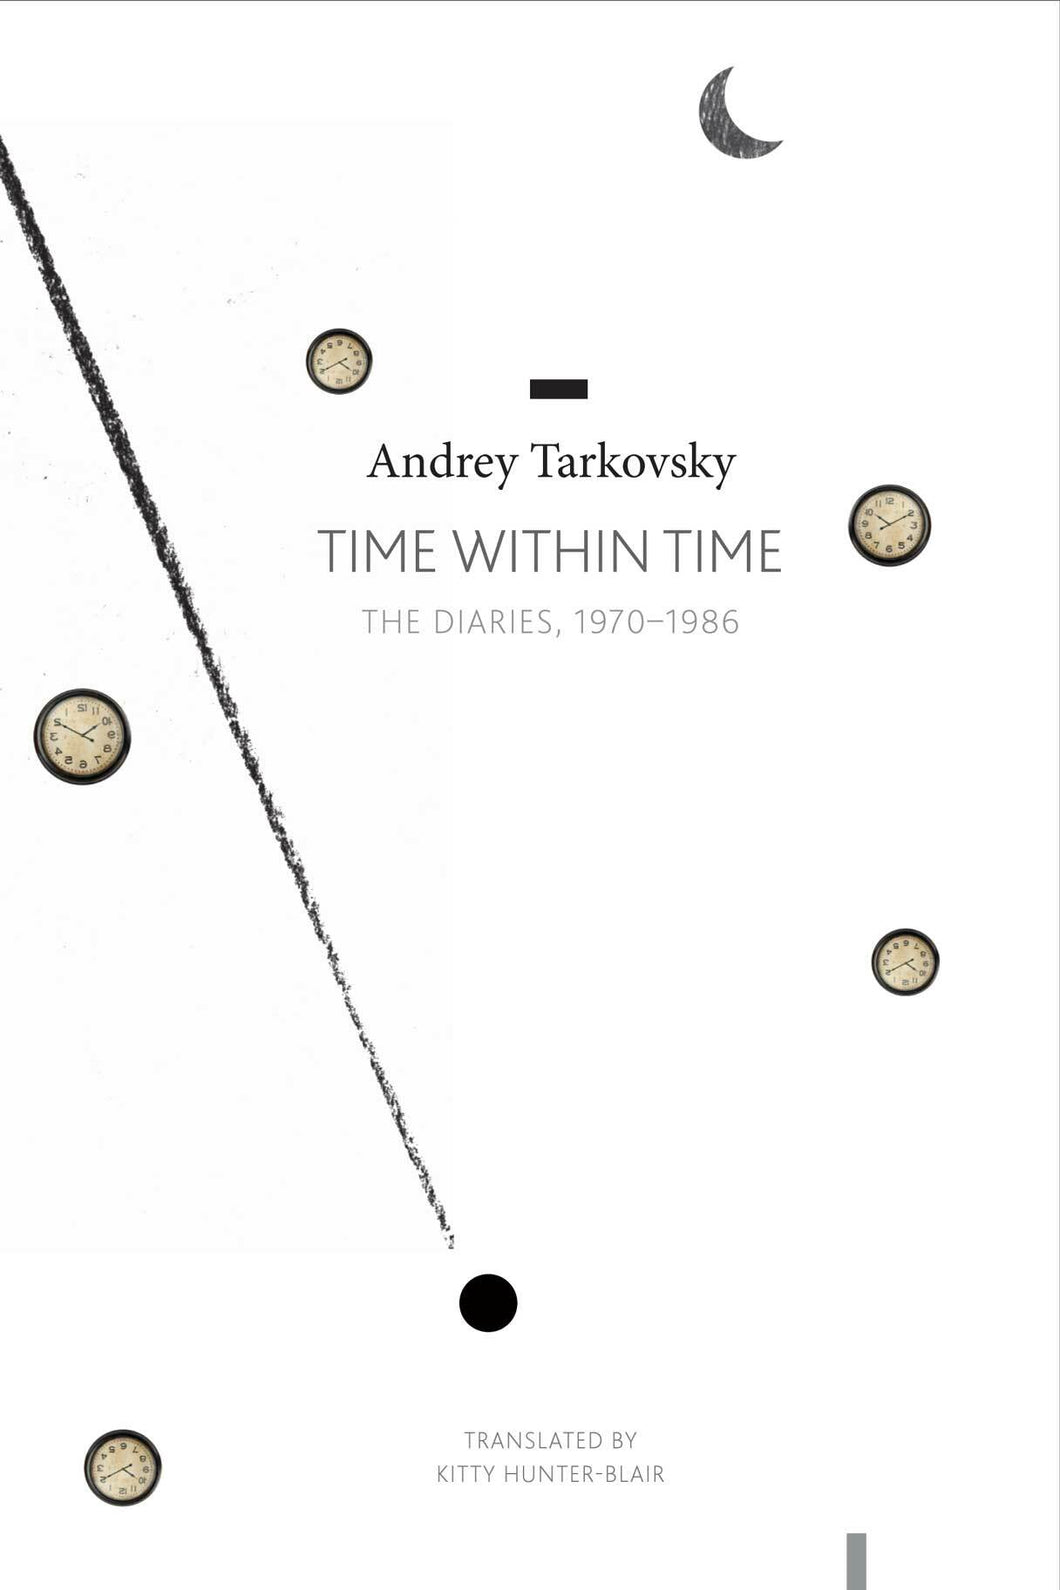 Time Within Time: The Diaries, 1970-1986 by Andrey Tarkovsky